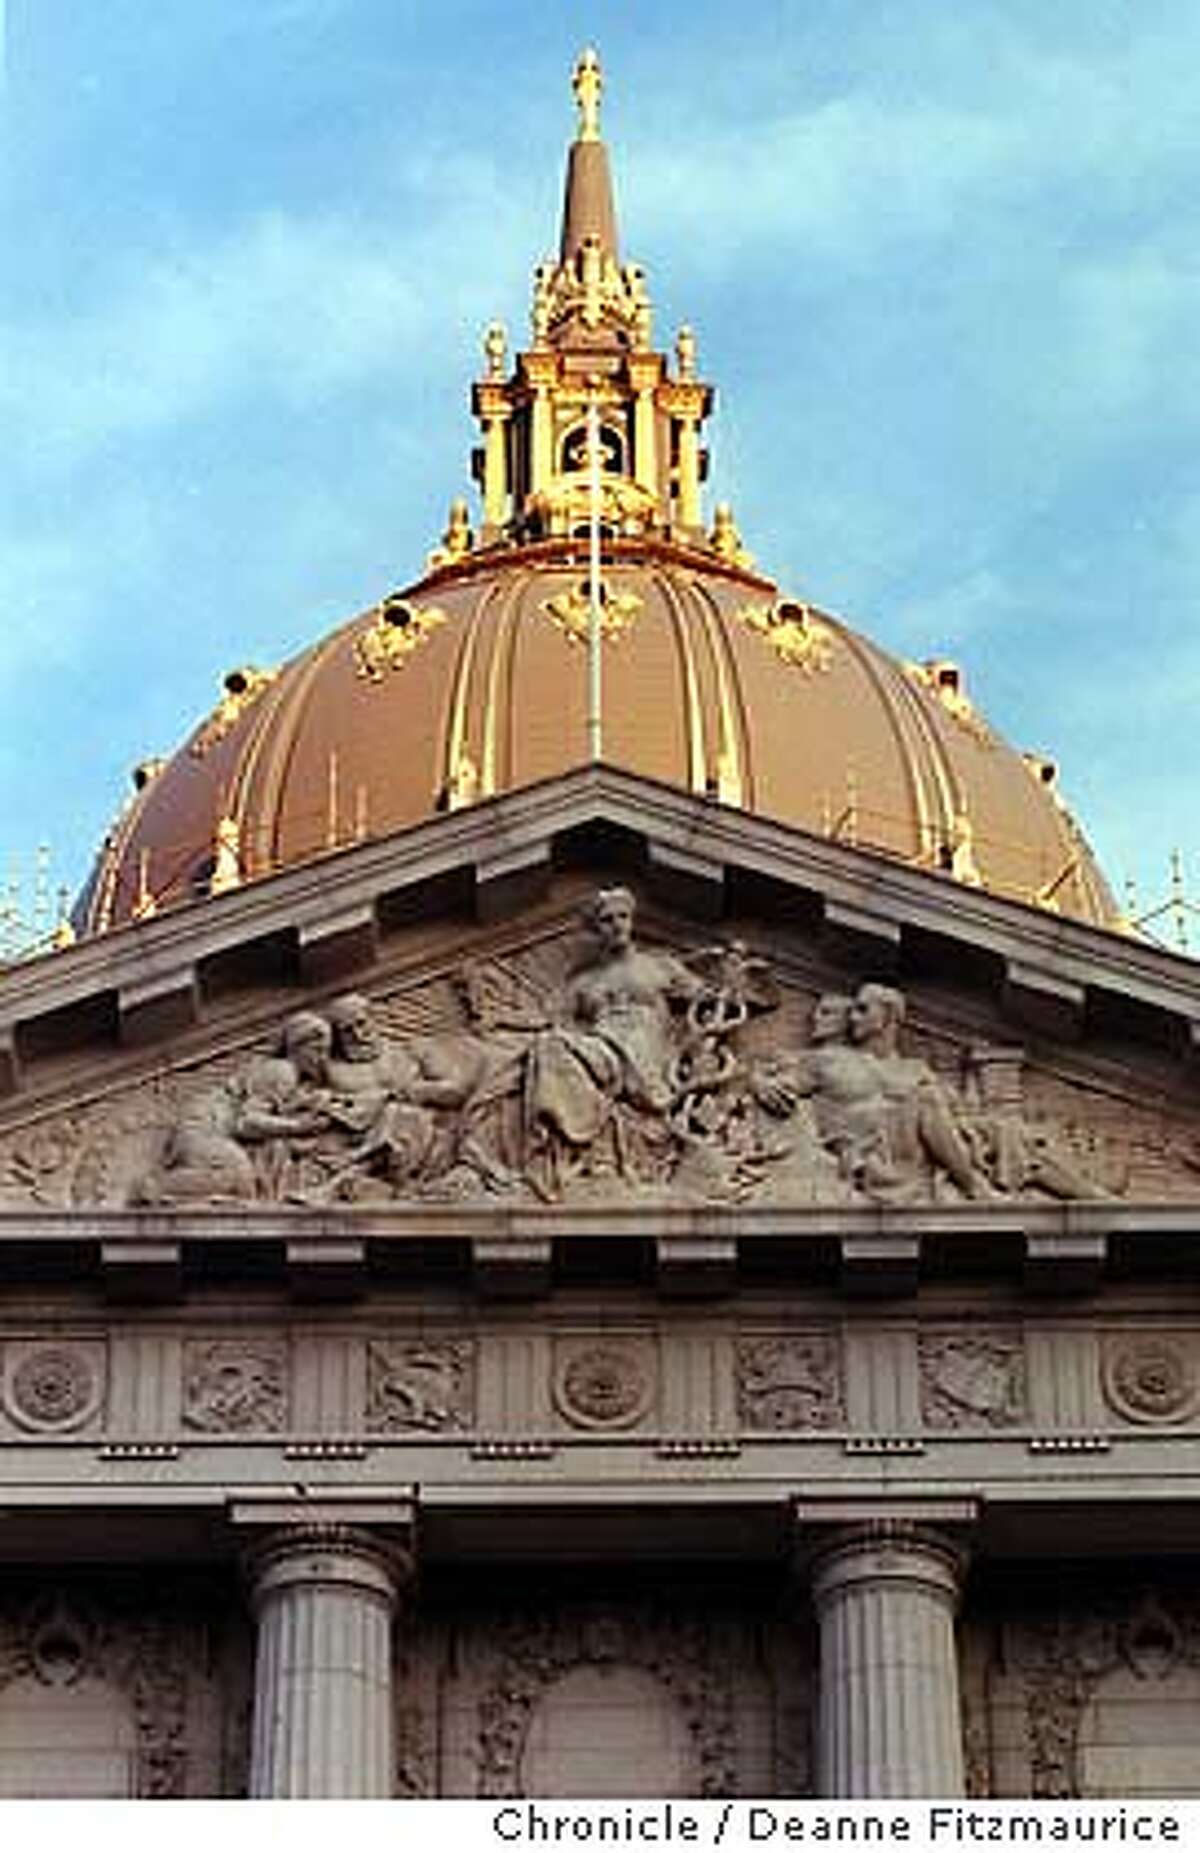 CITY HALL5/C/08DEC98/MN/DF - San Francisco City Hall has recently been renovated and the dome painted with gold leaf. CHRONICLE PHOTO BY DEANNE FITZMAURICE ALSO RAN: 01/22/1999 CAT